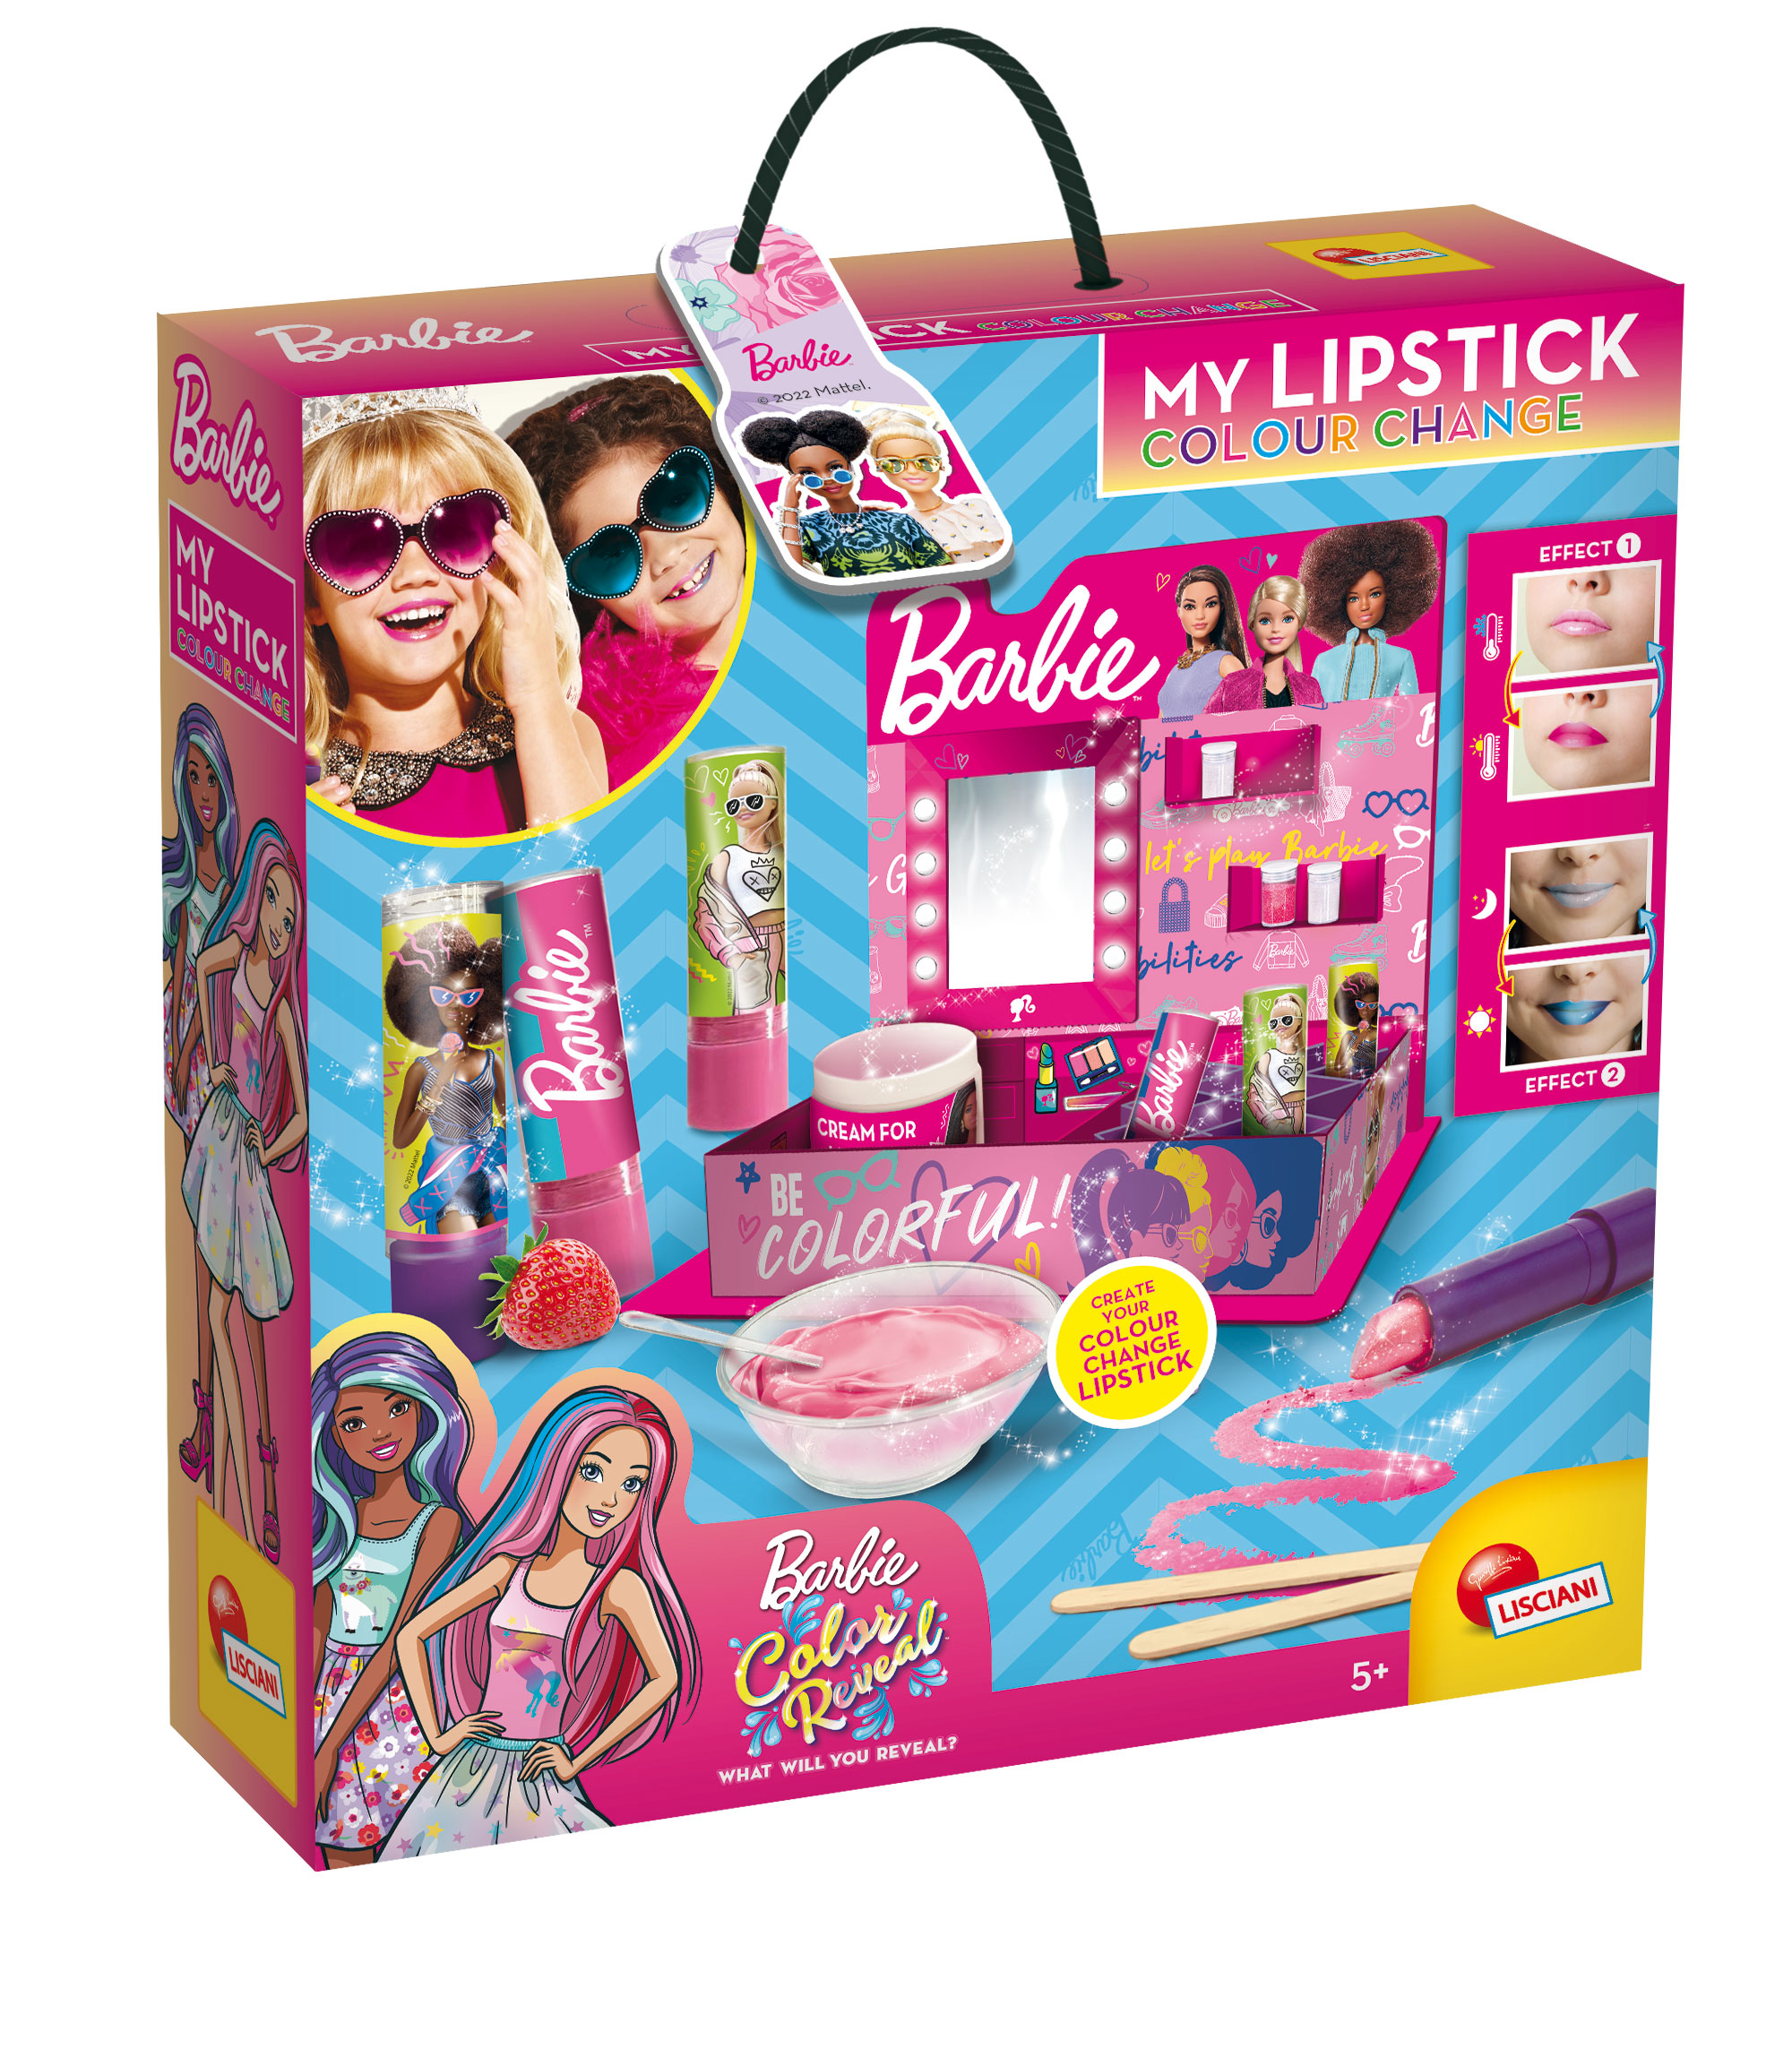 Photo 1 of the game BARBIE MY LIPSTICK COLOUR CHANGE